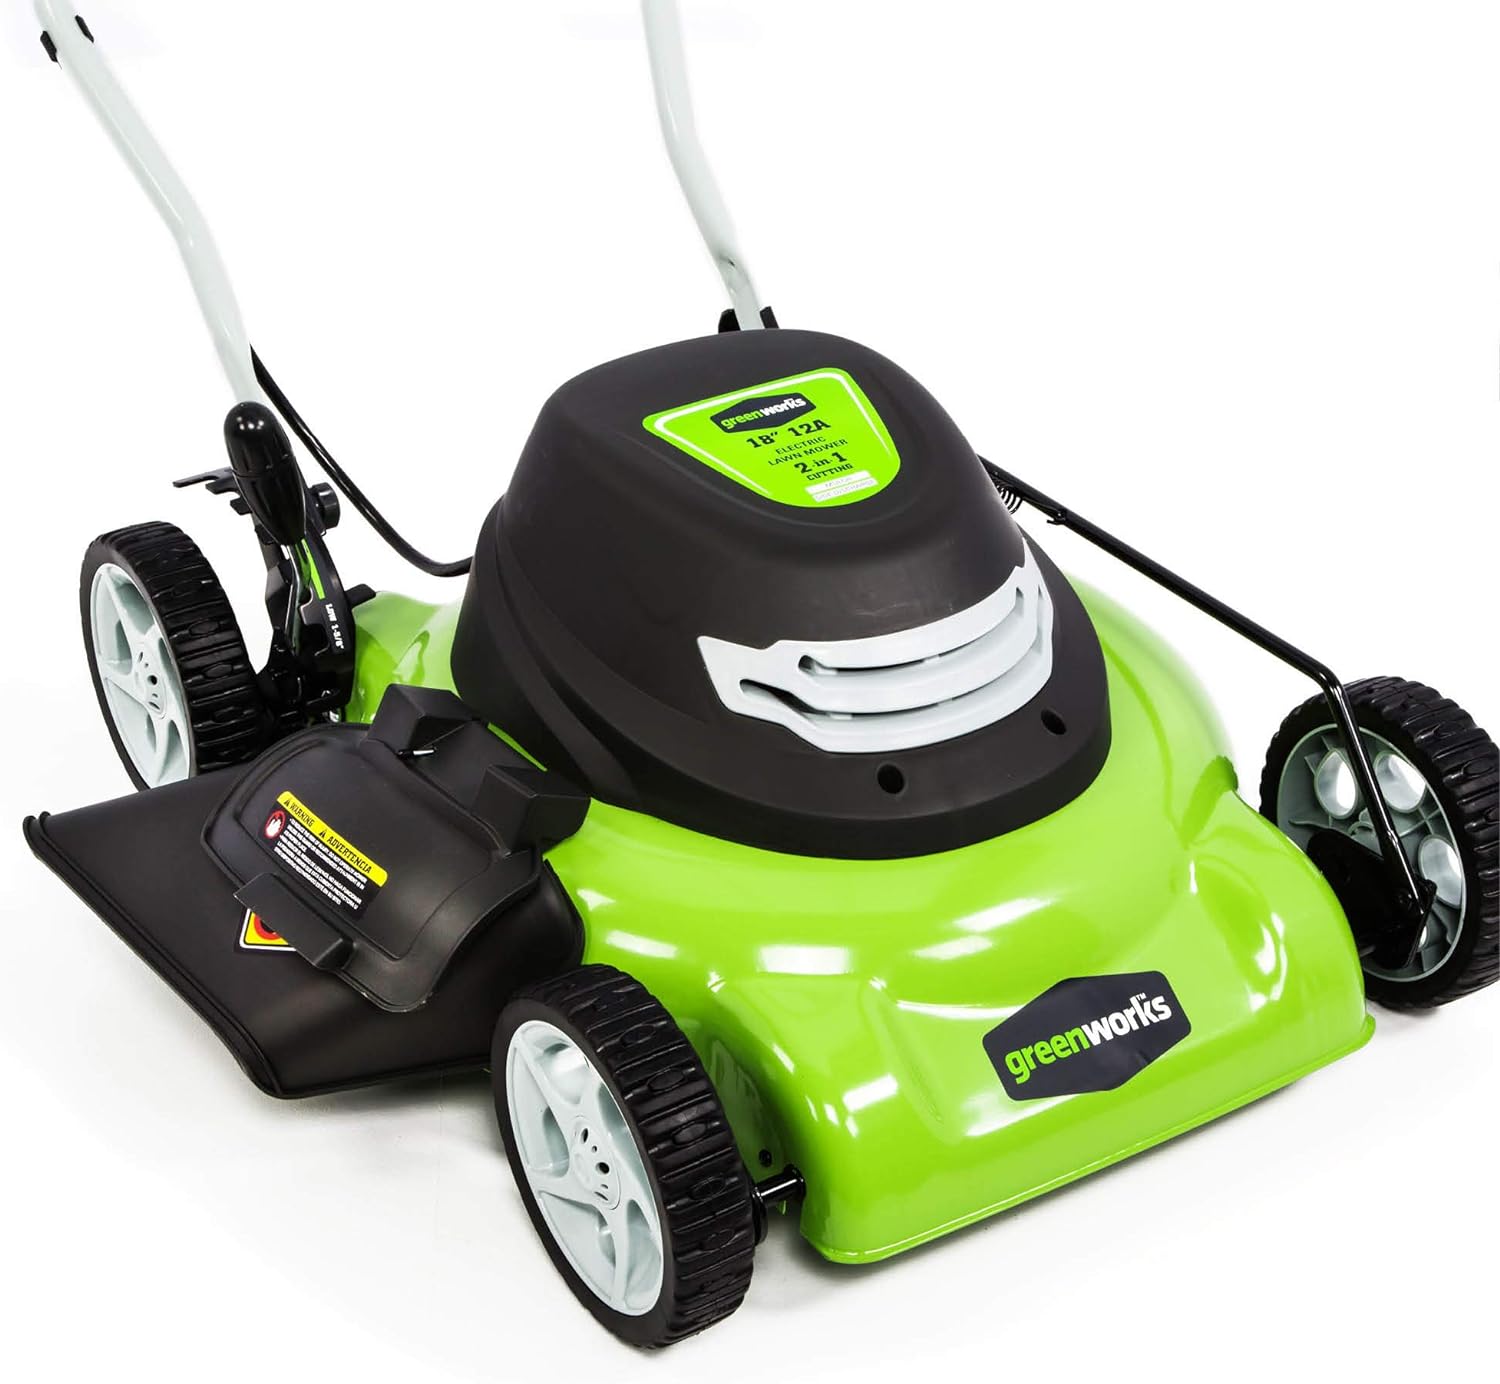 Greenworks 18" Corded Electric 12 Amp Push Lawn Mower 25012 - image 2 of 6